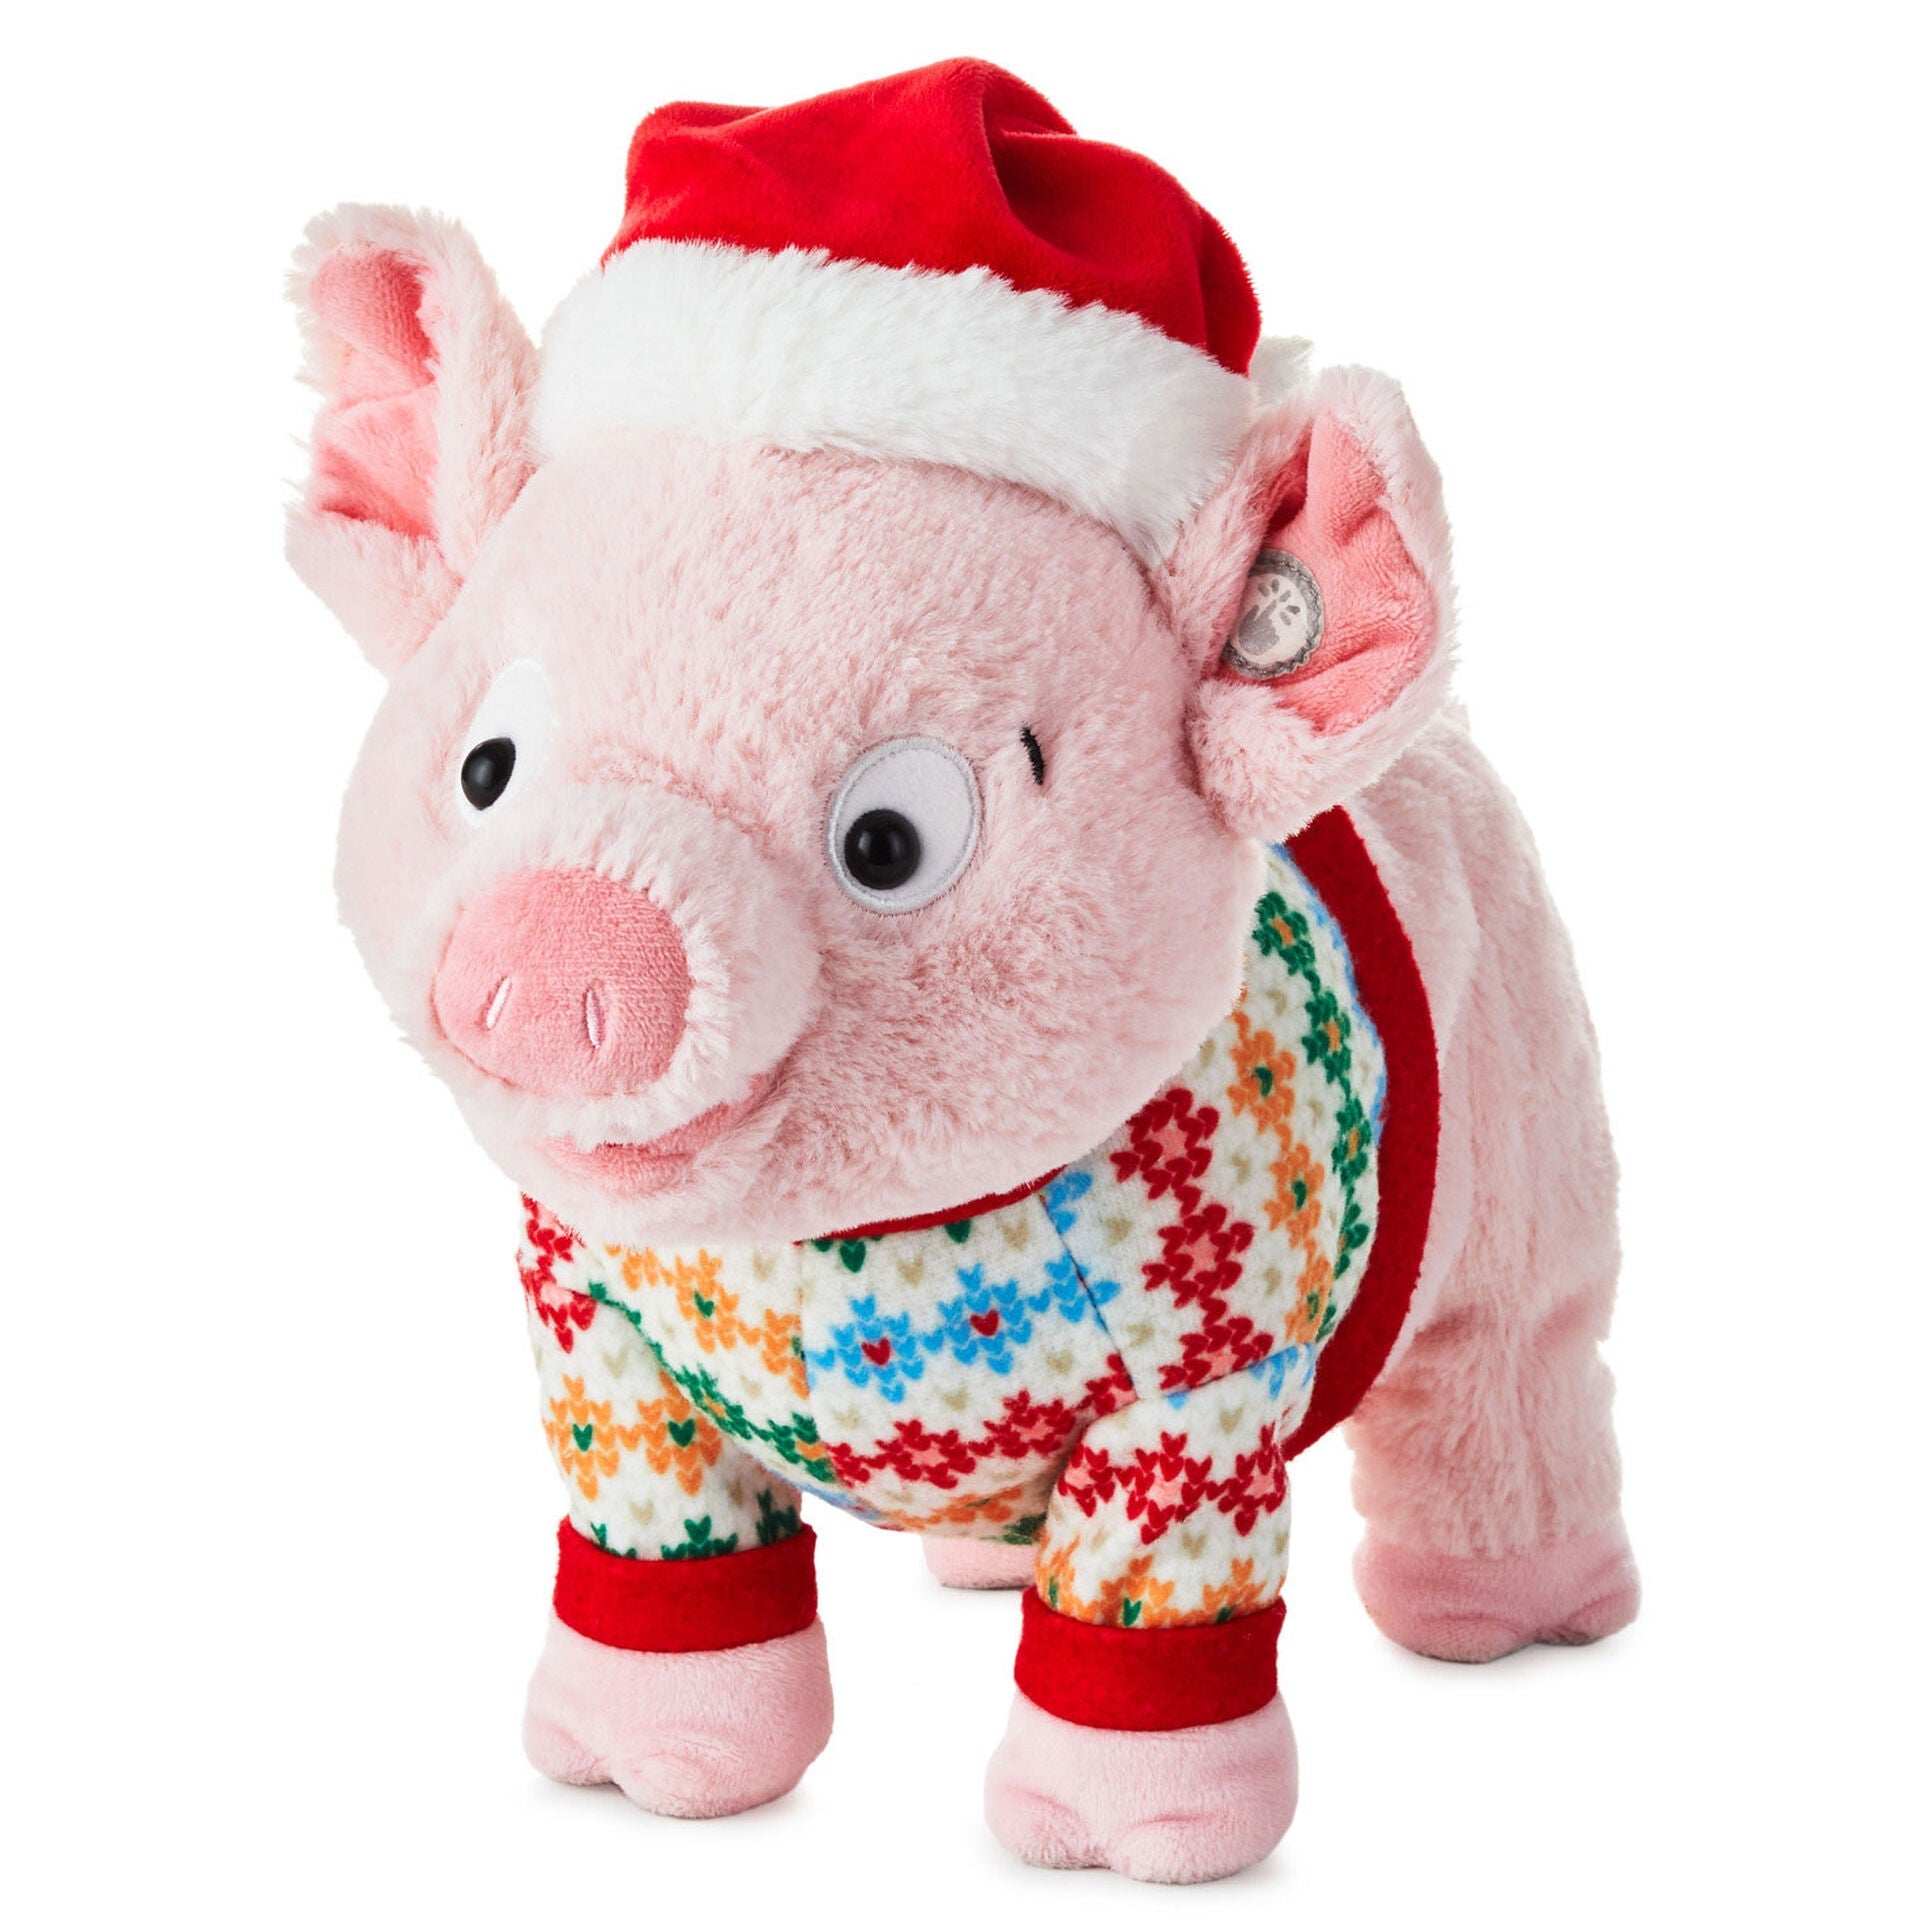 Season's Squealings Pig Plush With Sound and Motion, 10"